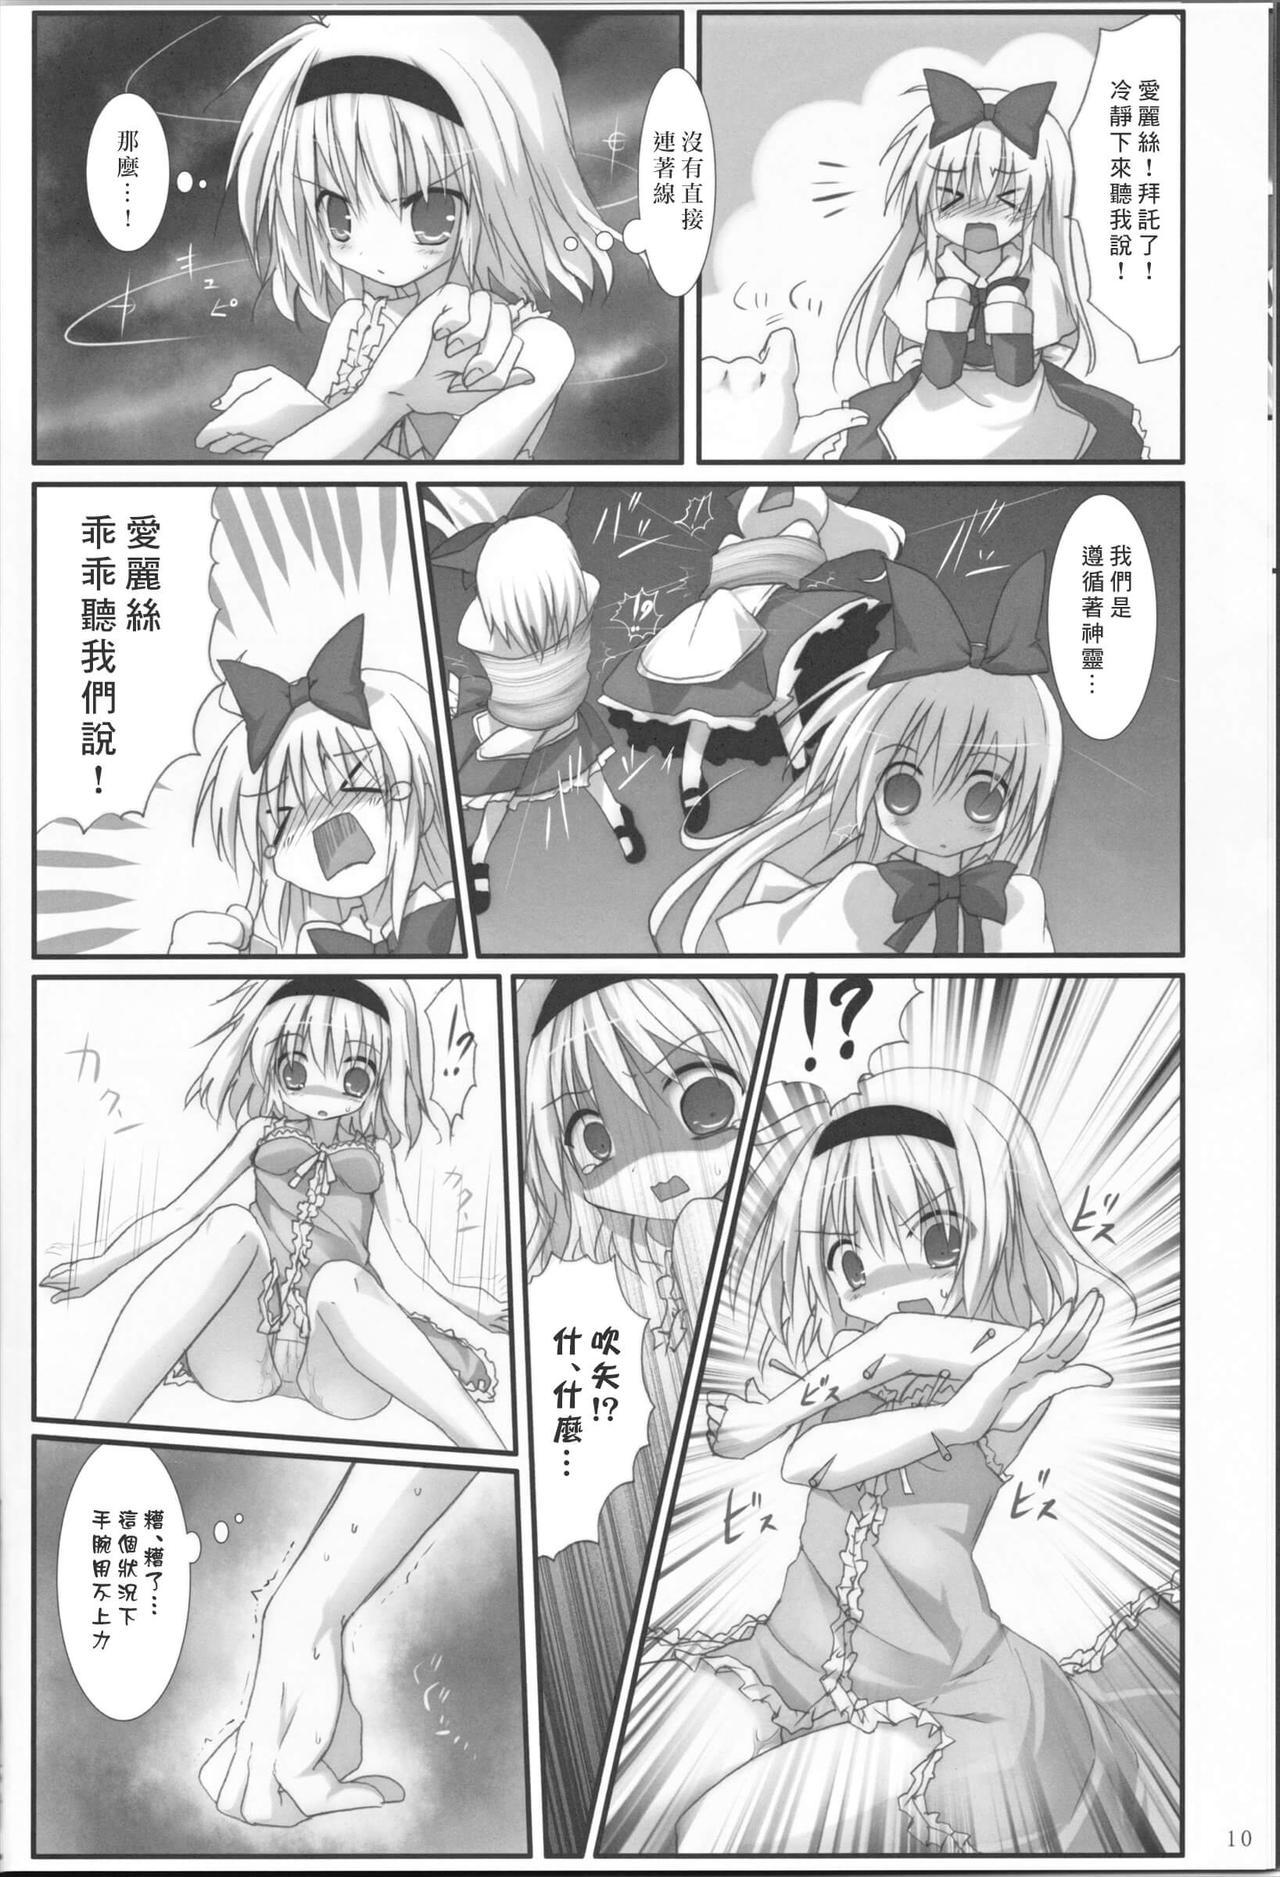 Humiliation Alice in Nightmare - Touhou project Hardcore Sex - Page 11